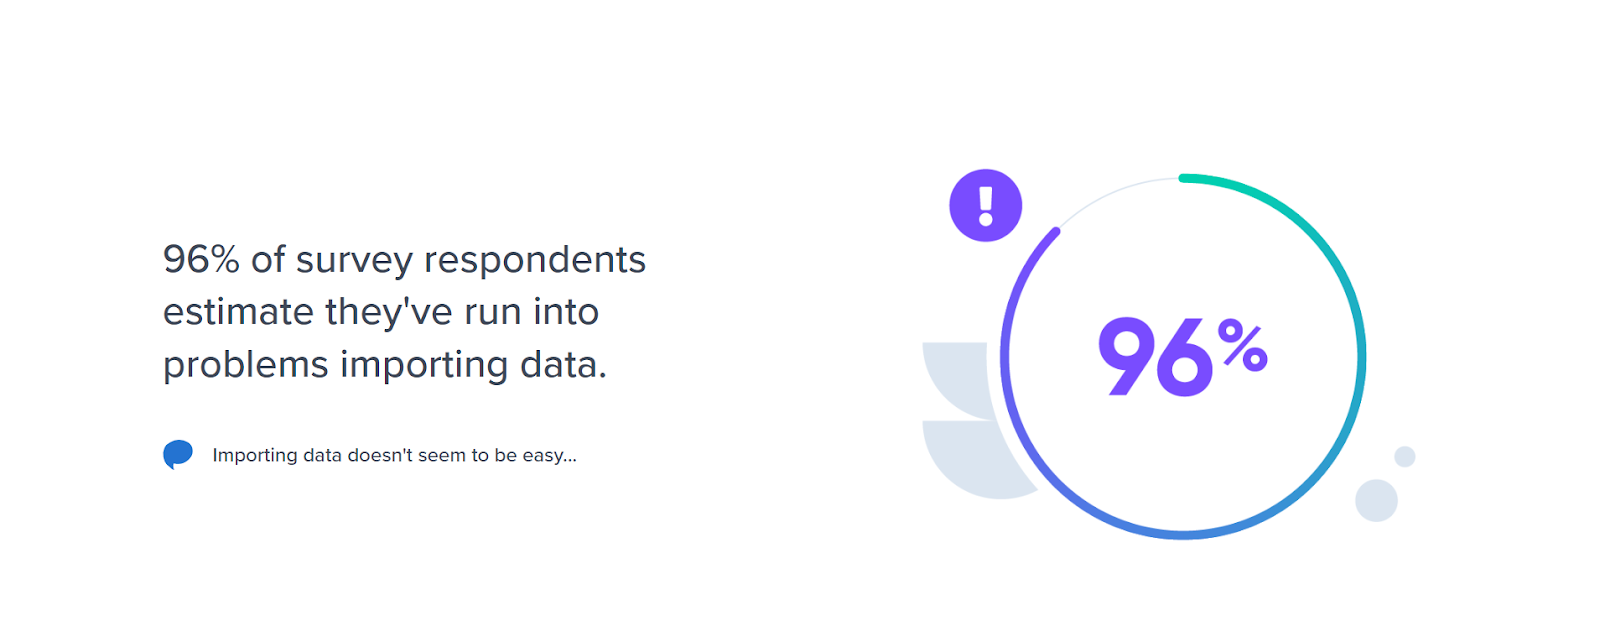 The image shows that 96% of respondents faced issues during data onboarding. 